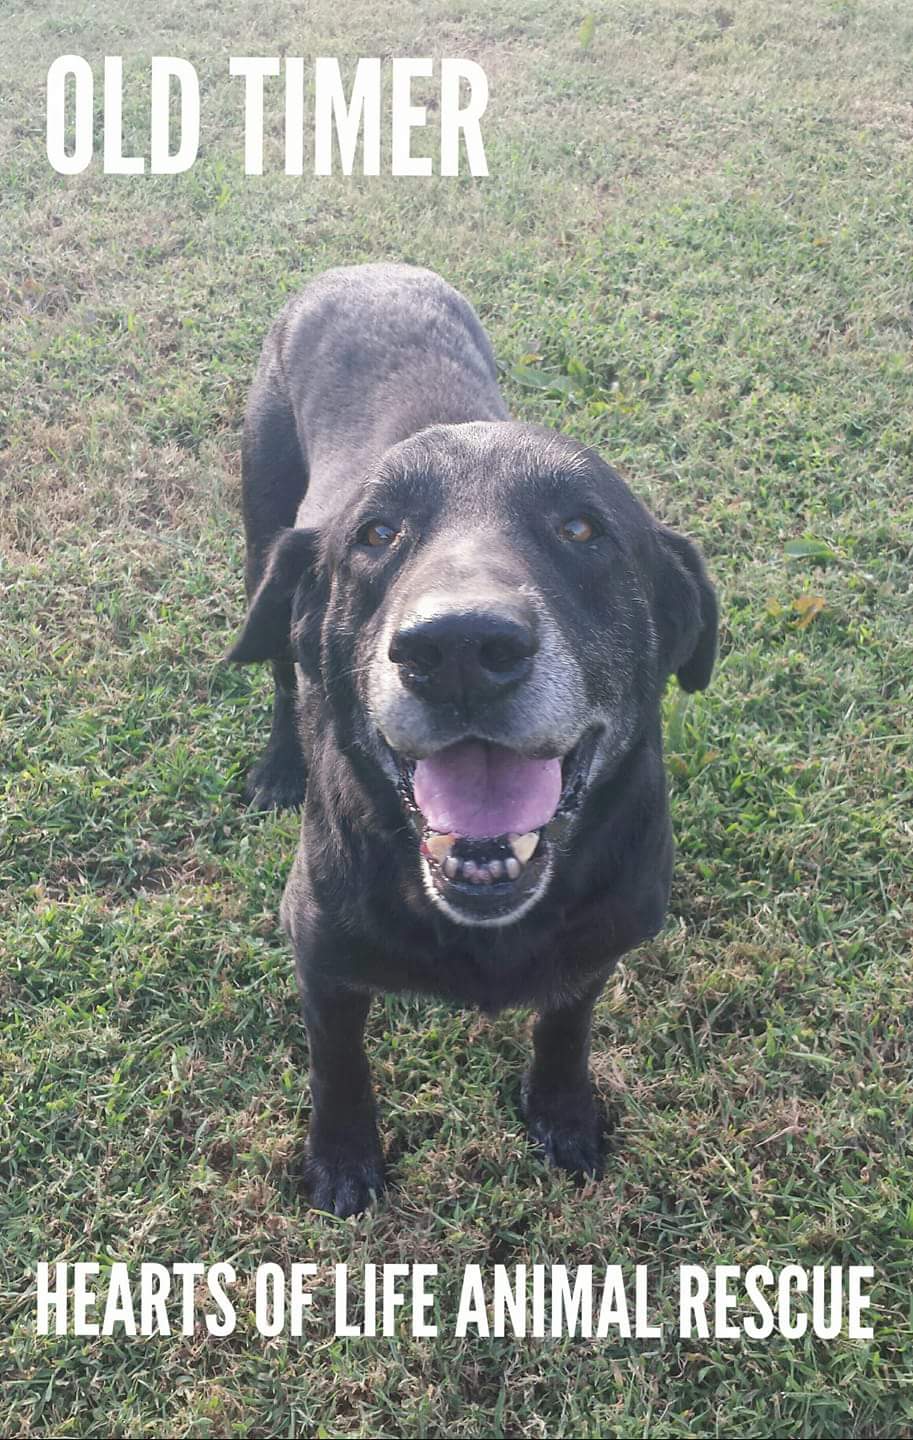 Hearts of Life Animal Rescue Dog of the Week-Meet Old Timer!